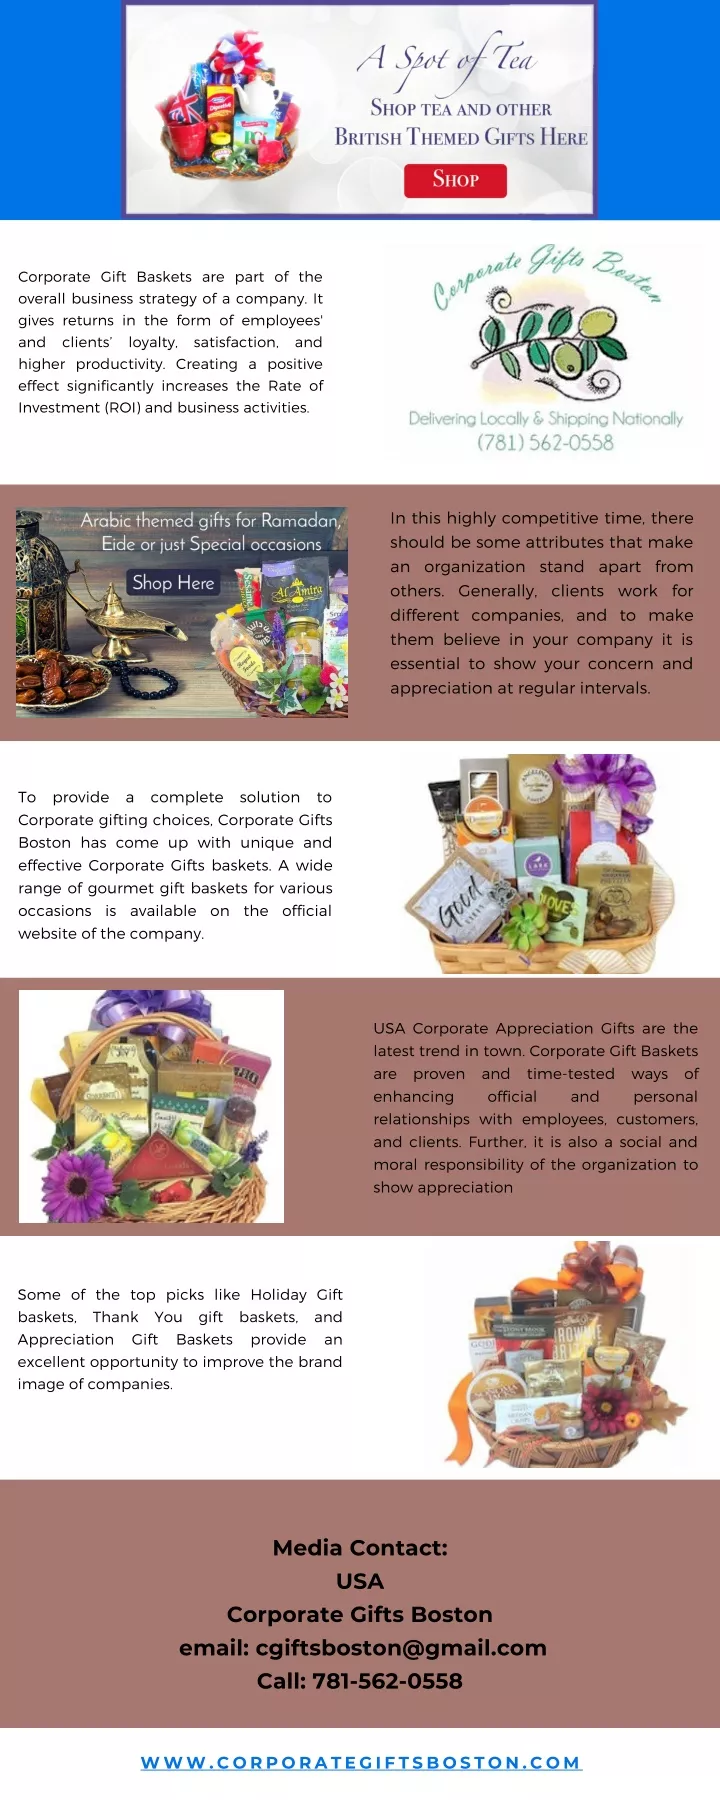 corporate gift baskets are part of the